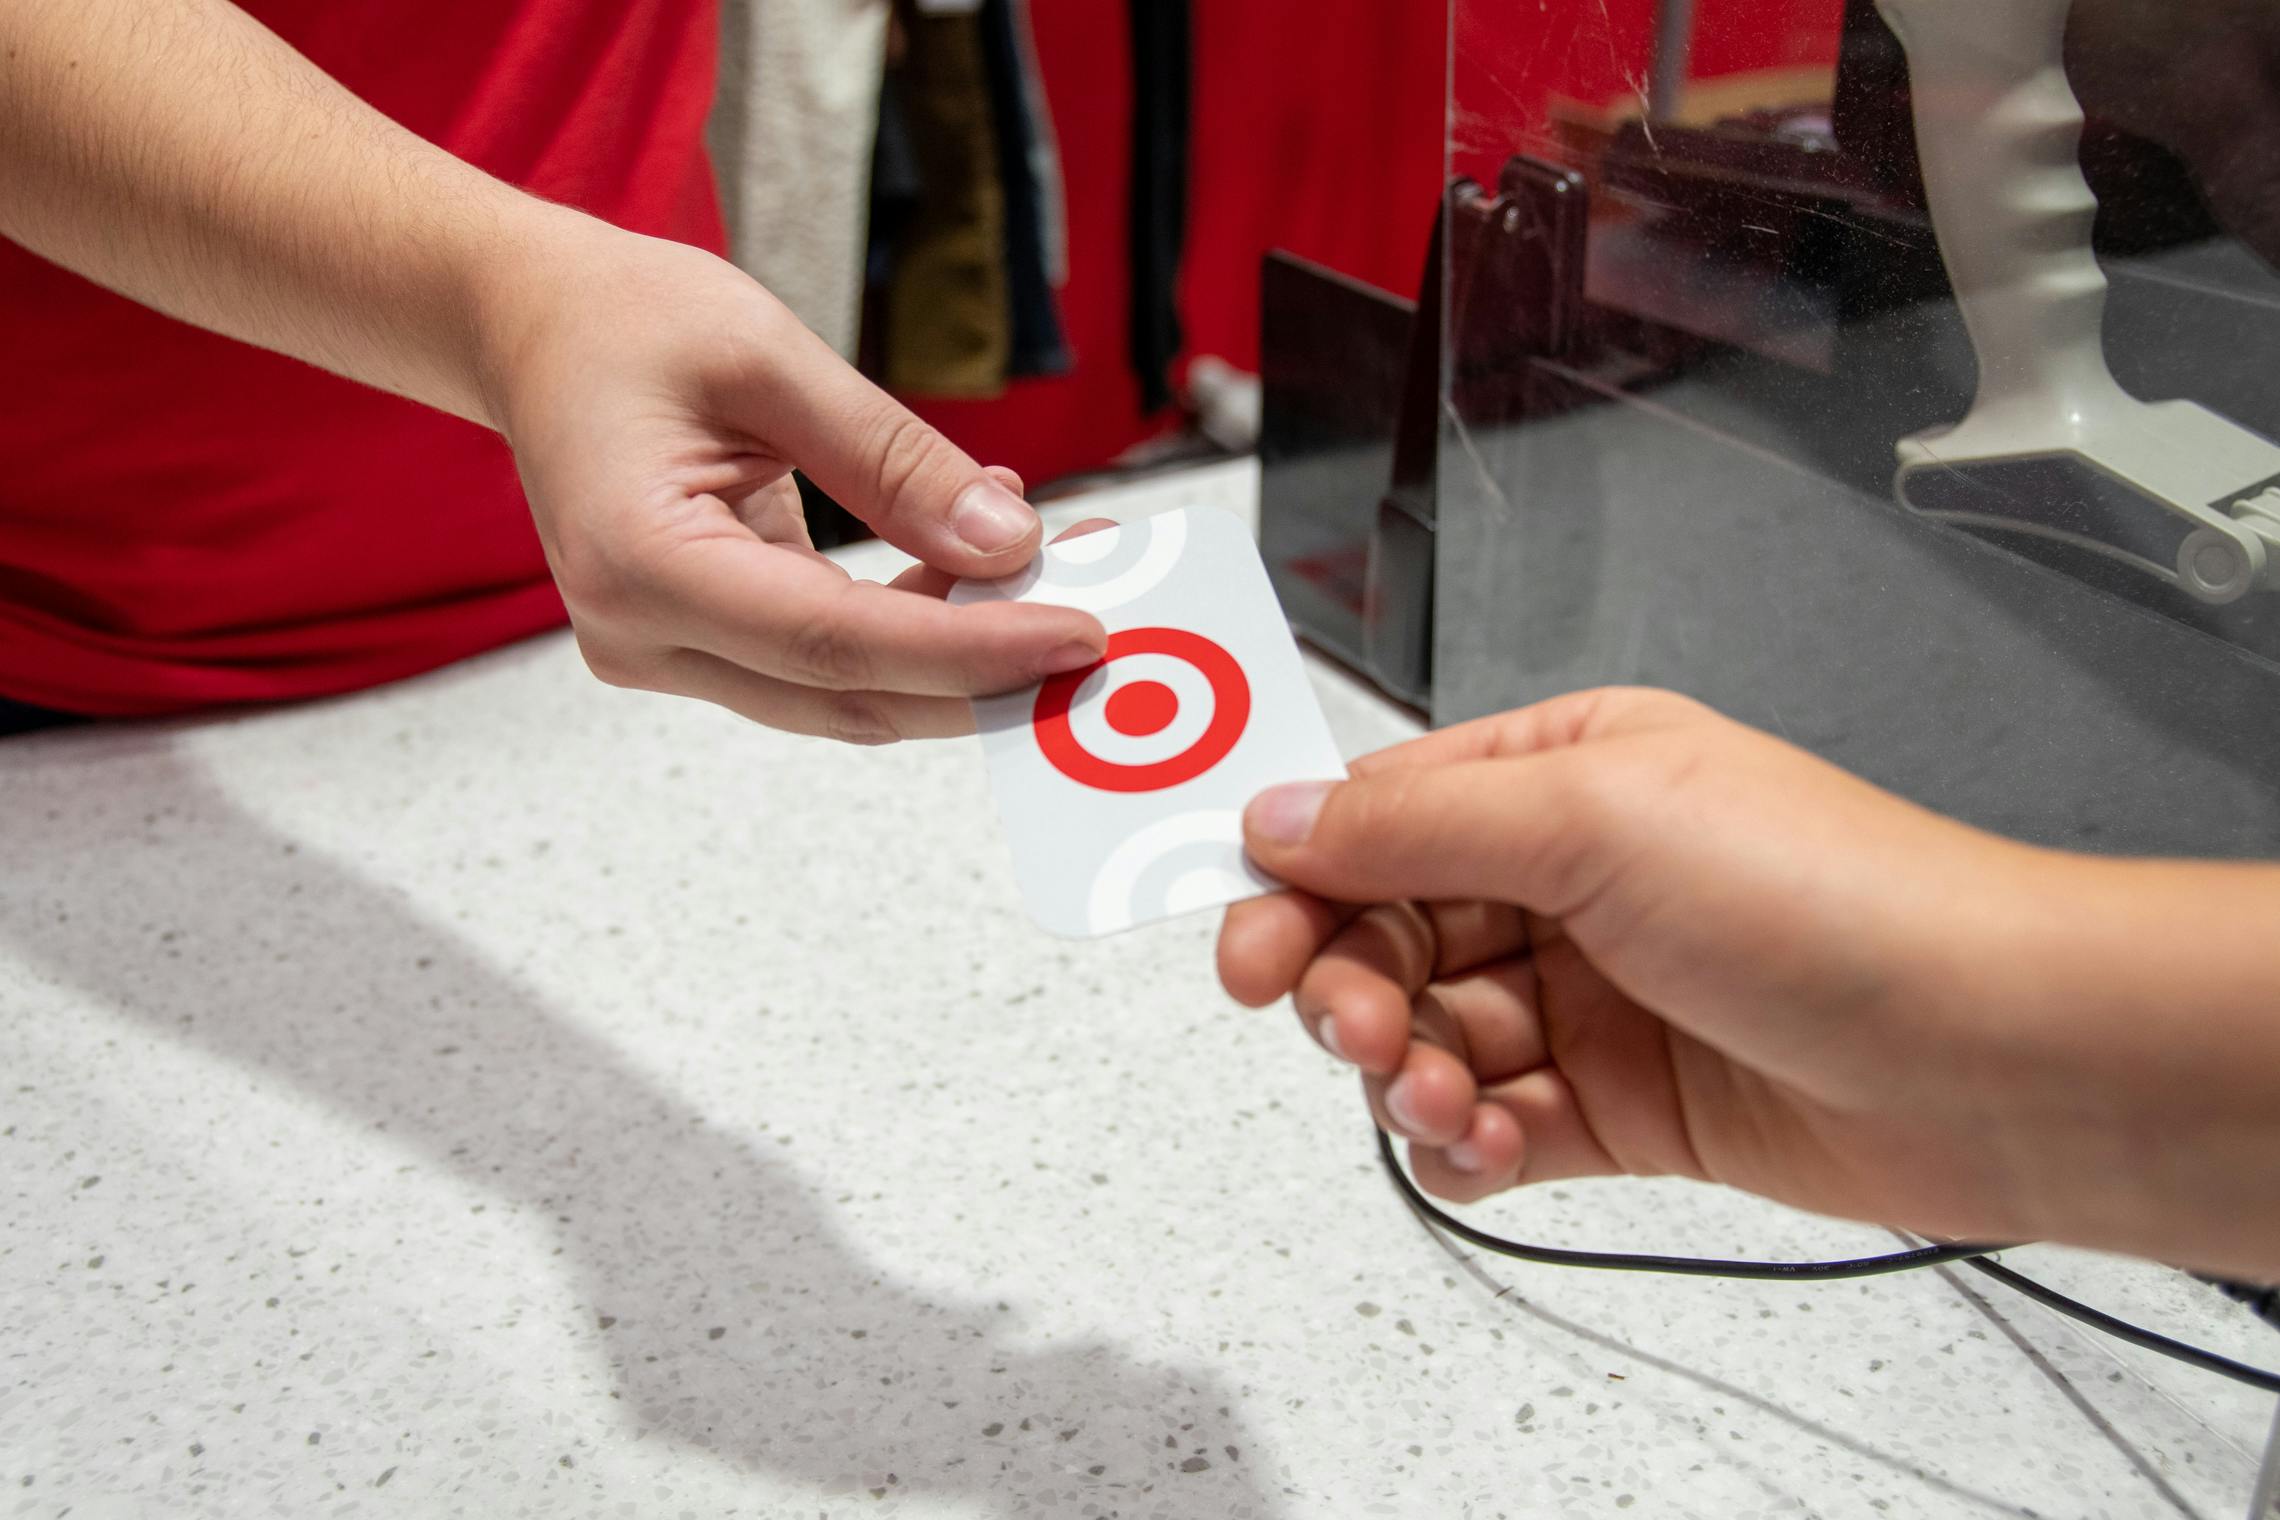 A Target employee handing someone a Target gift card at the register.